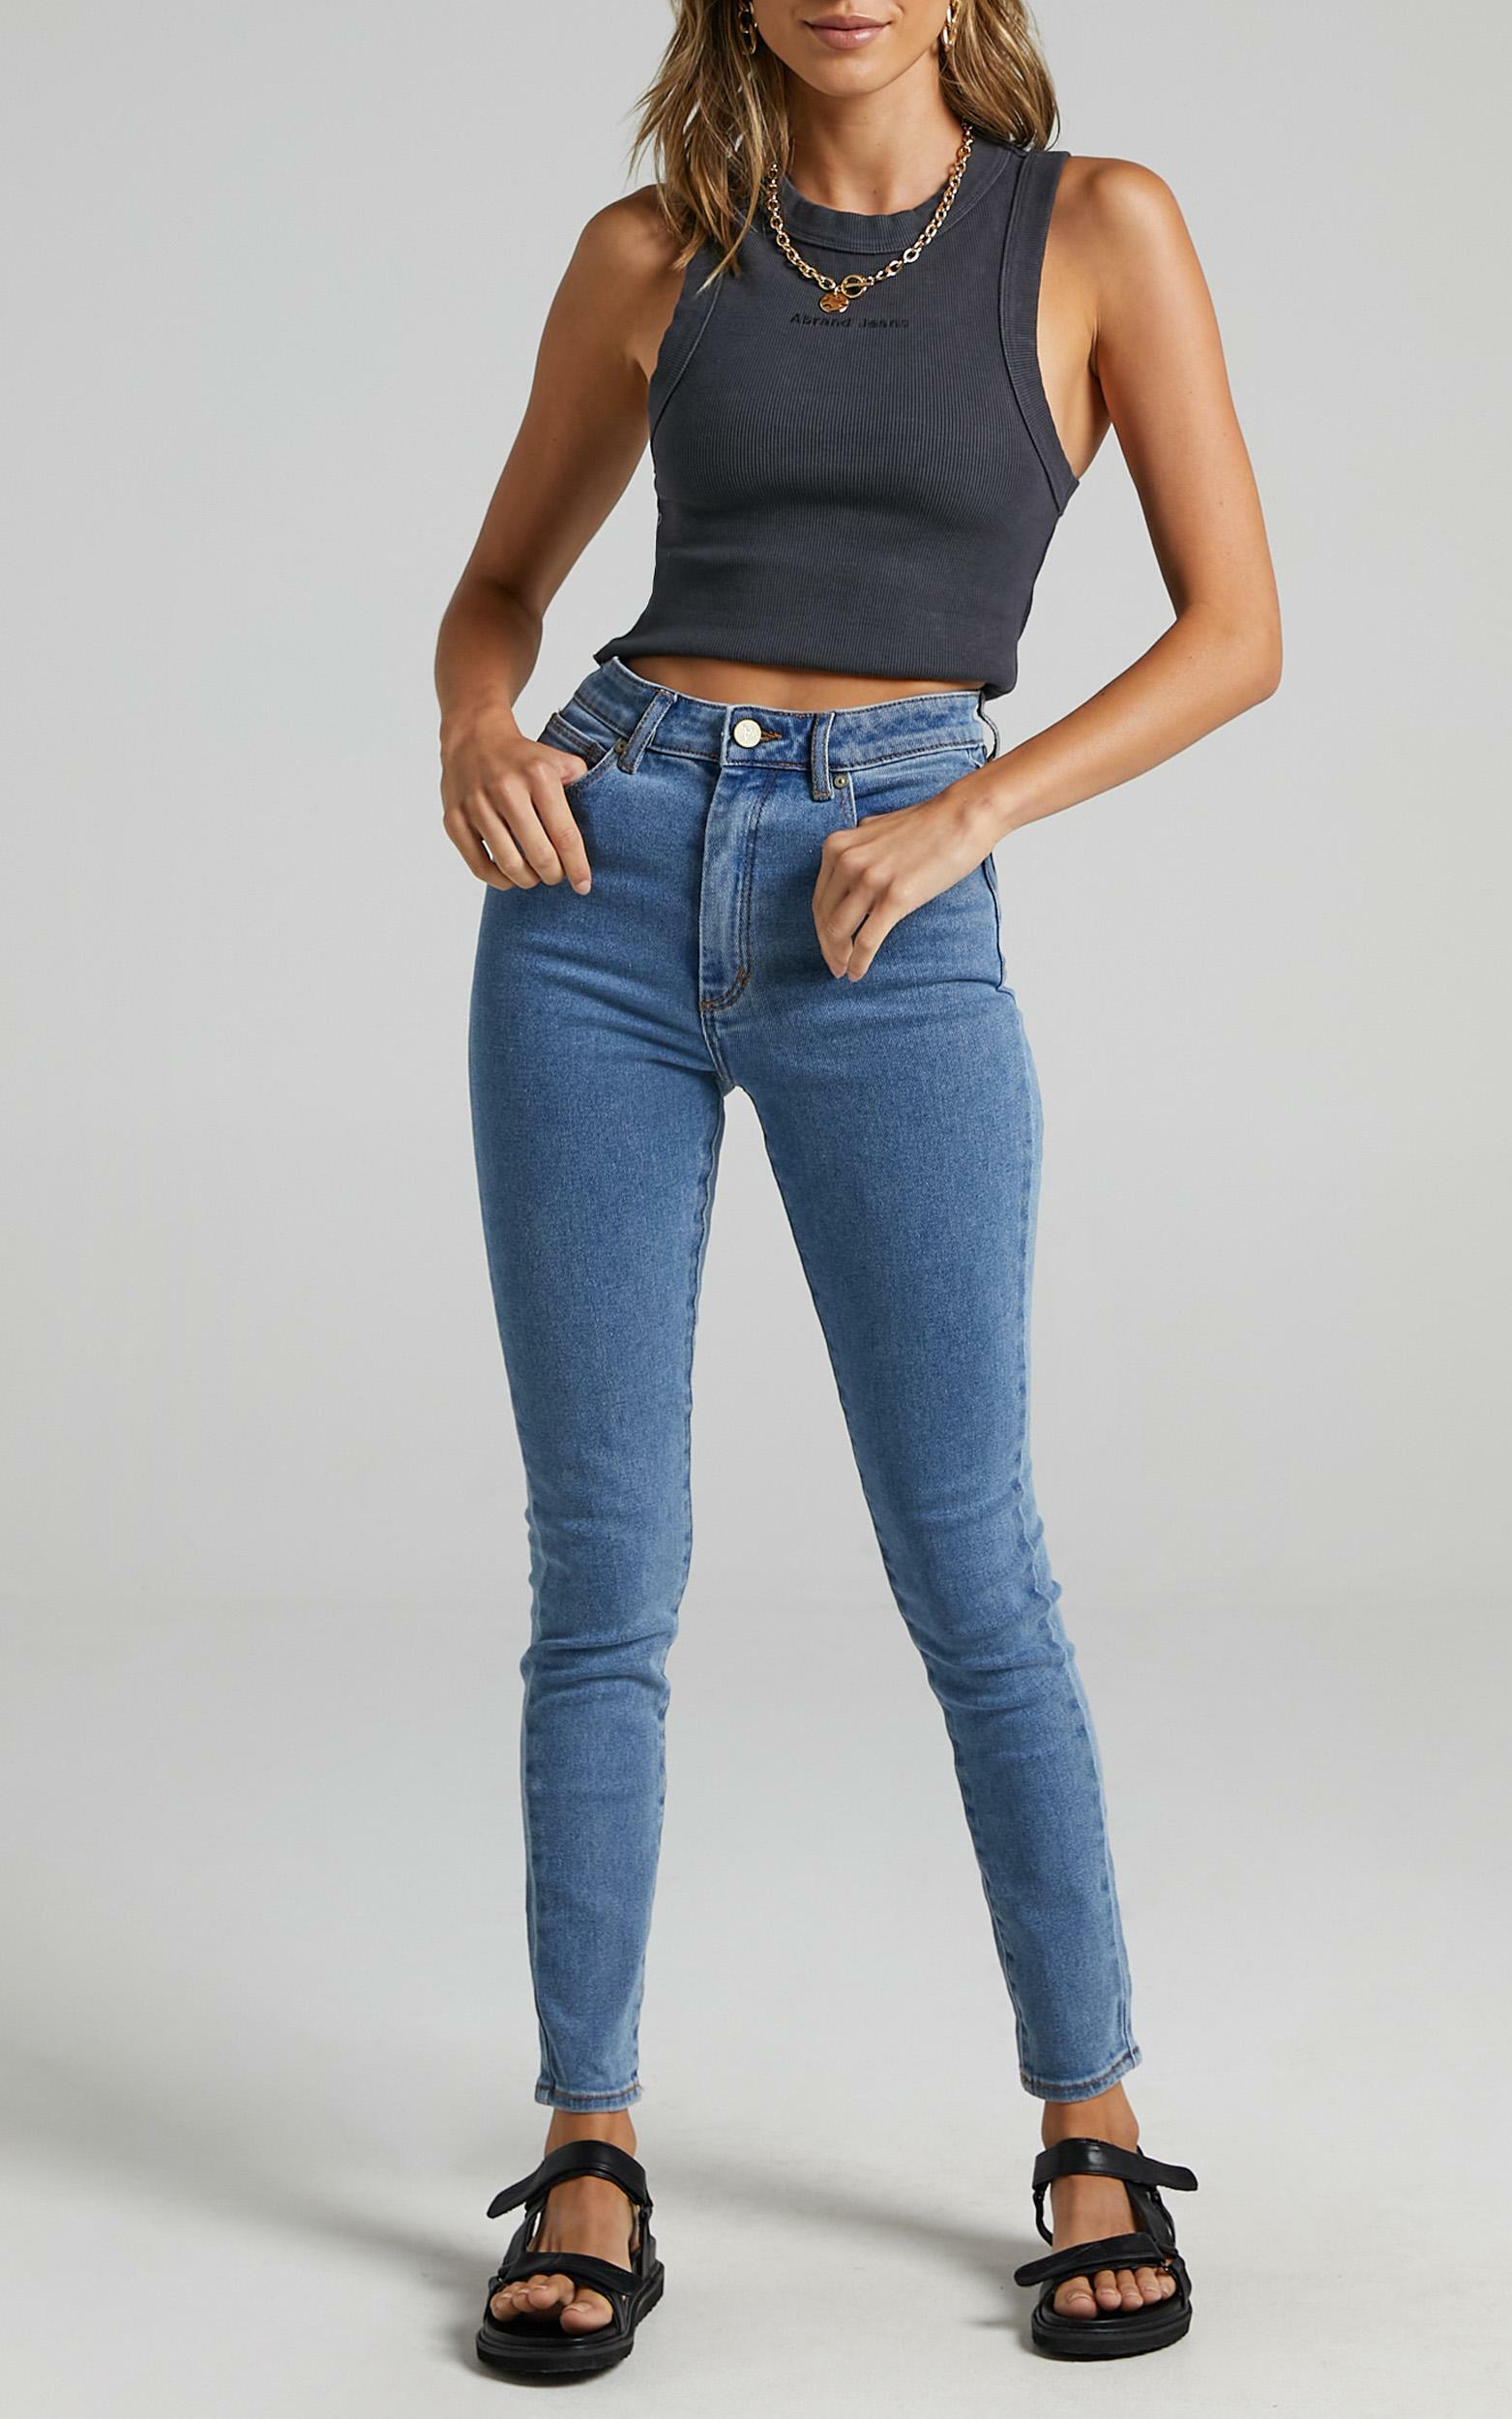 Abrand - A High Skinny Ankle Basher Jean in La Blues - 06, BLU1, hi-res image number null